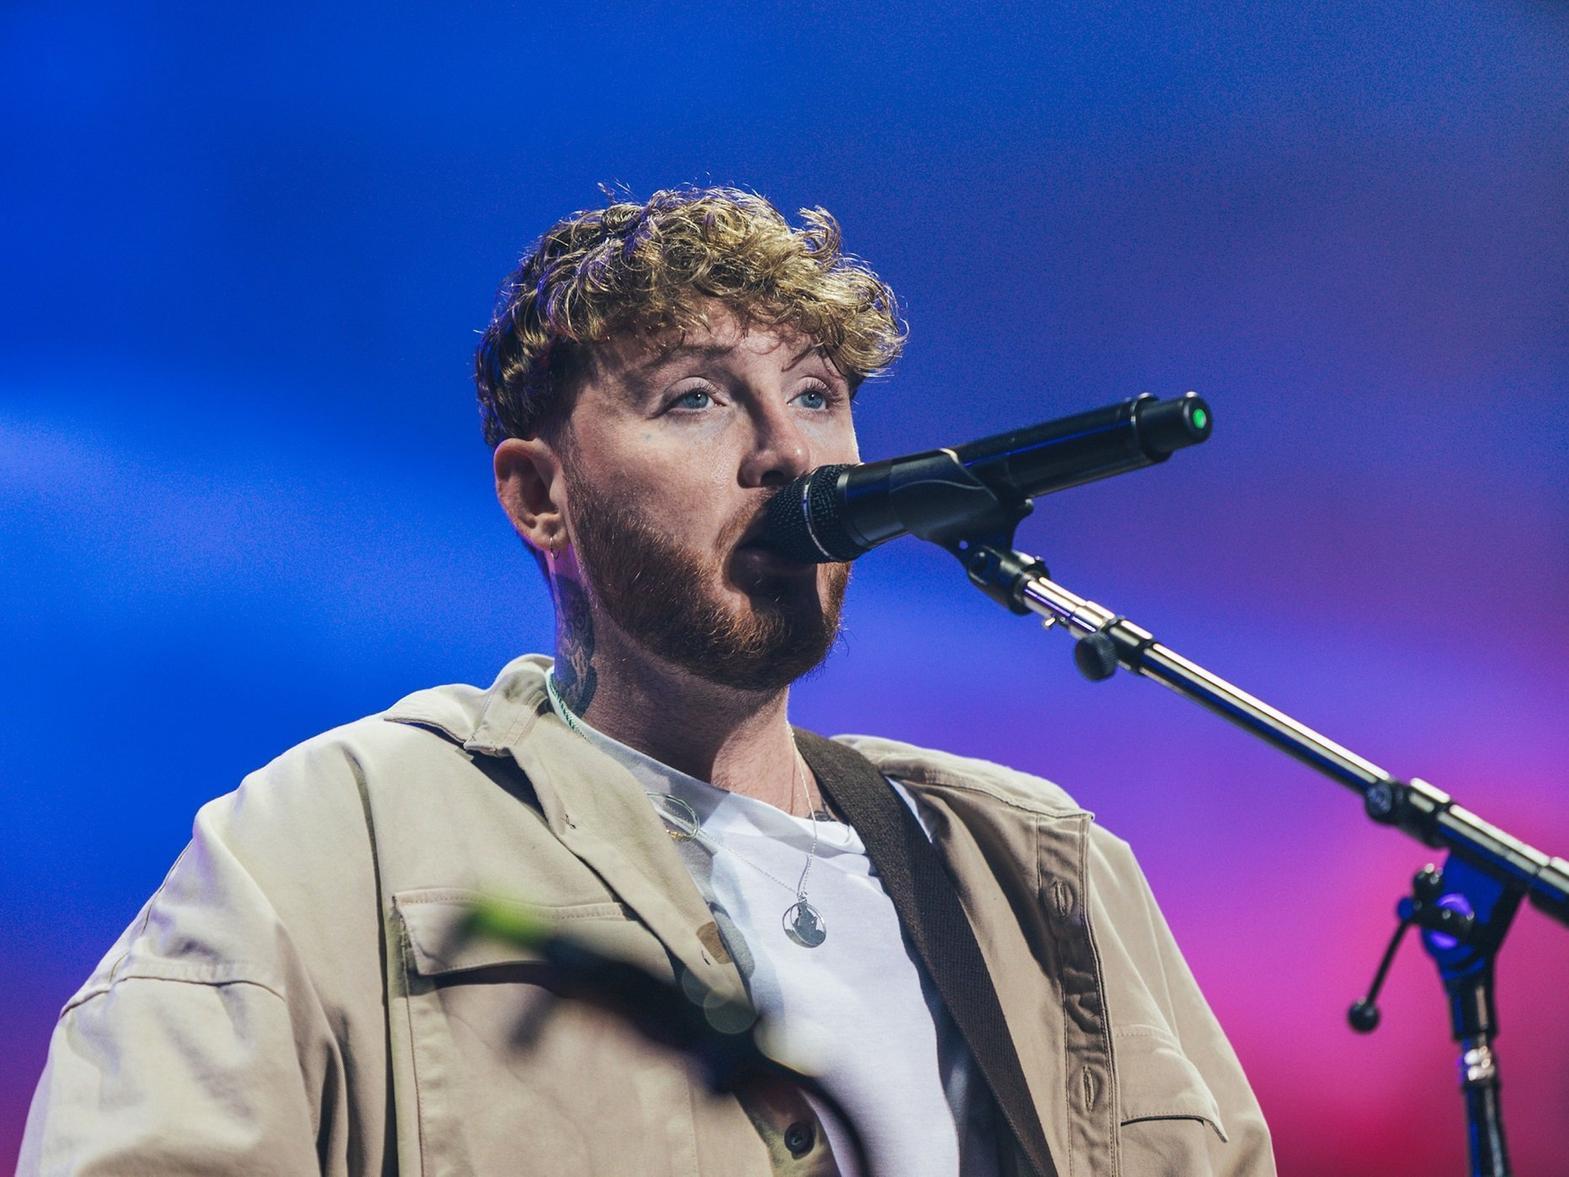 11 March: James Arthur was recently awarded a disc for reaching a billion streams on Spotify with his No.1 global hit 'Say You Won't Let Go'. Expect the hit and many others at his concert in March.